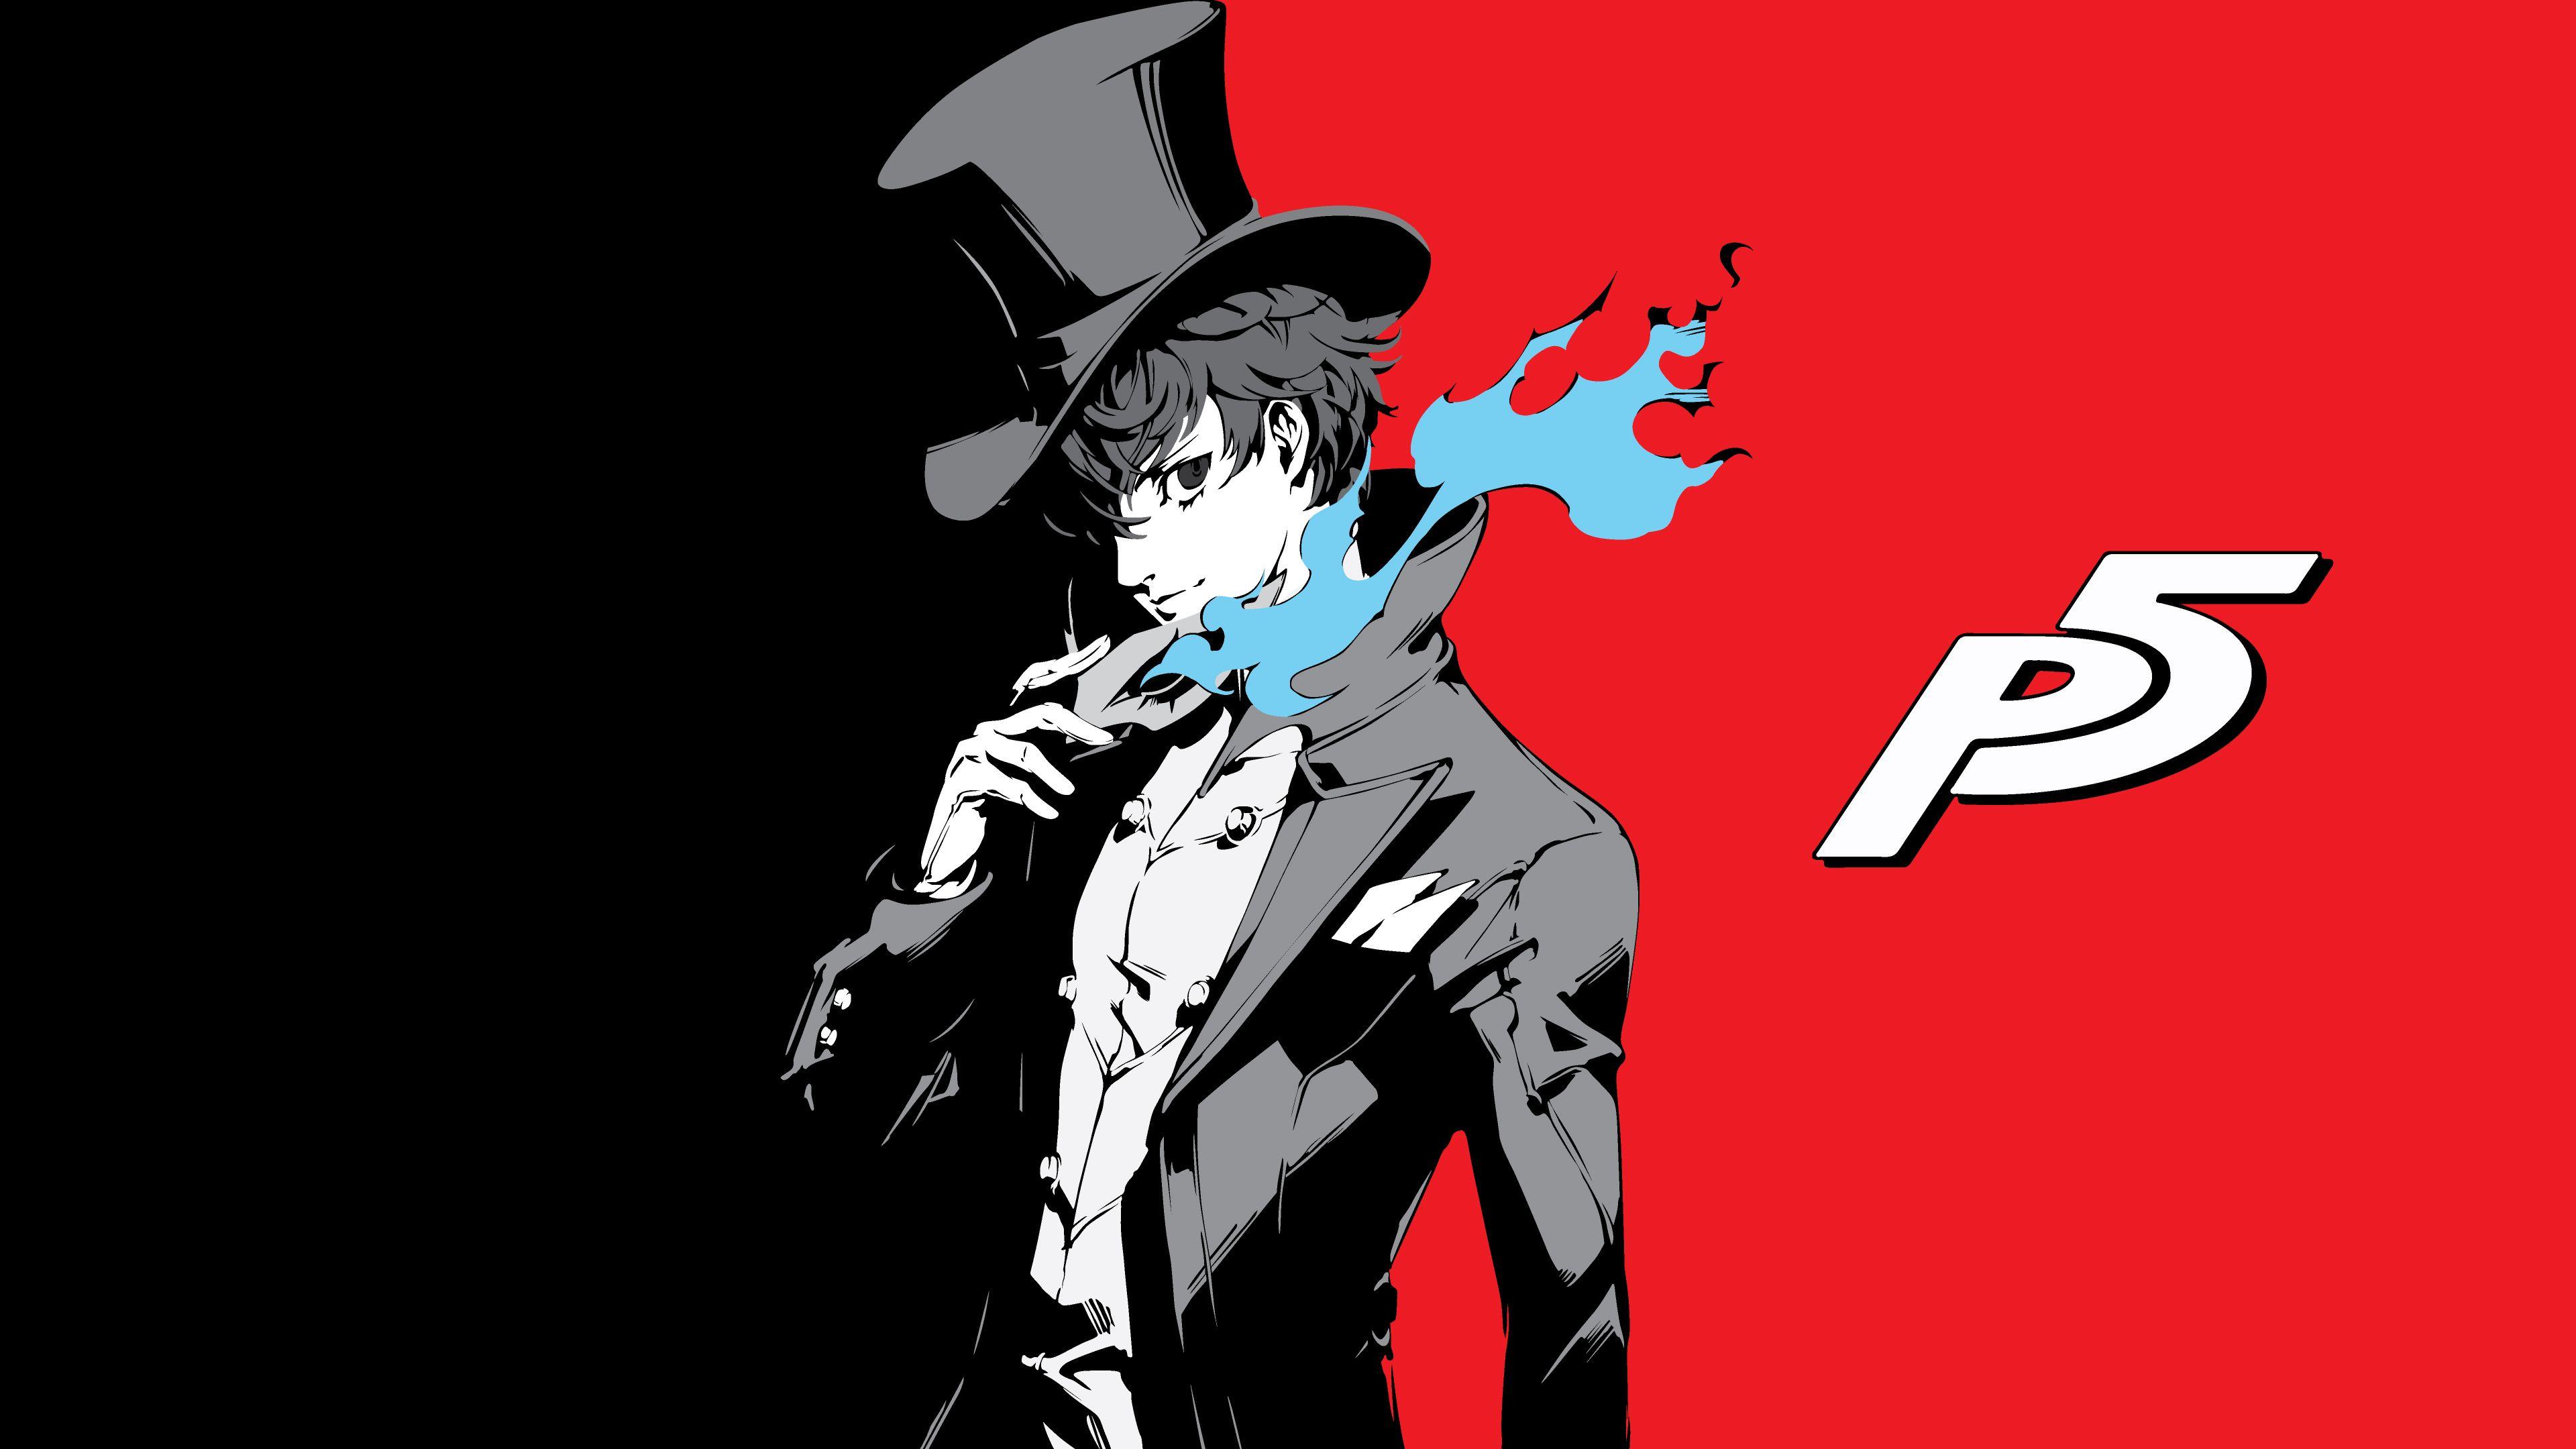 Persona 5 Royal Wallpapers - Top Free Persona 5 Royal Backgrounds